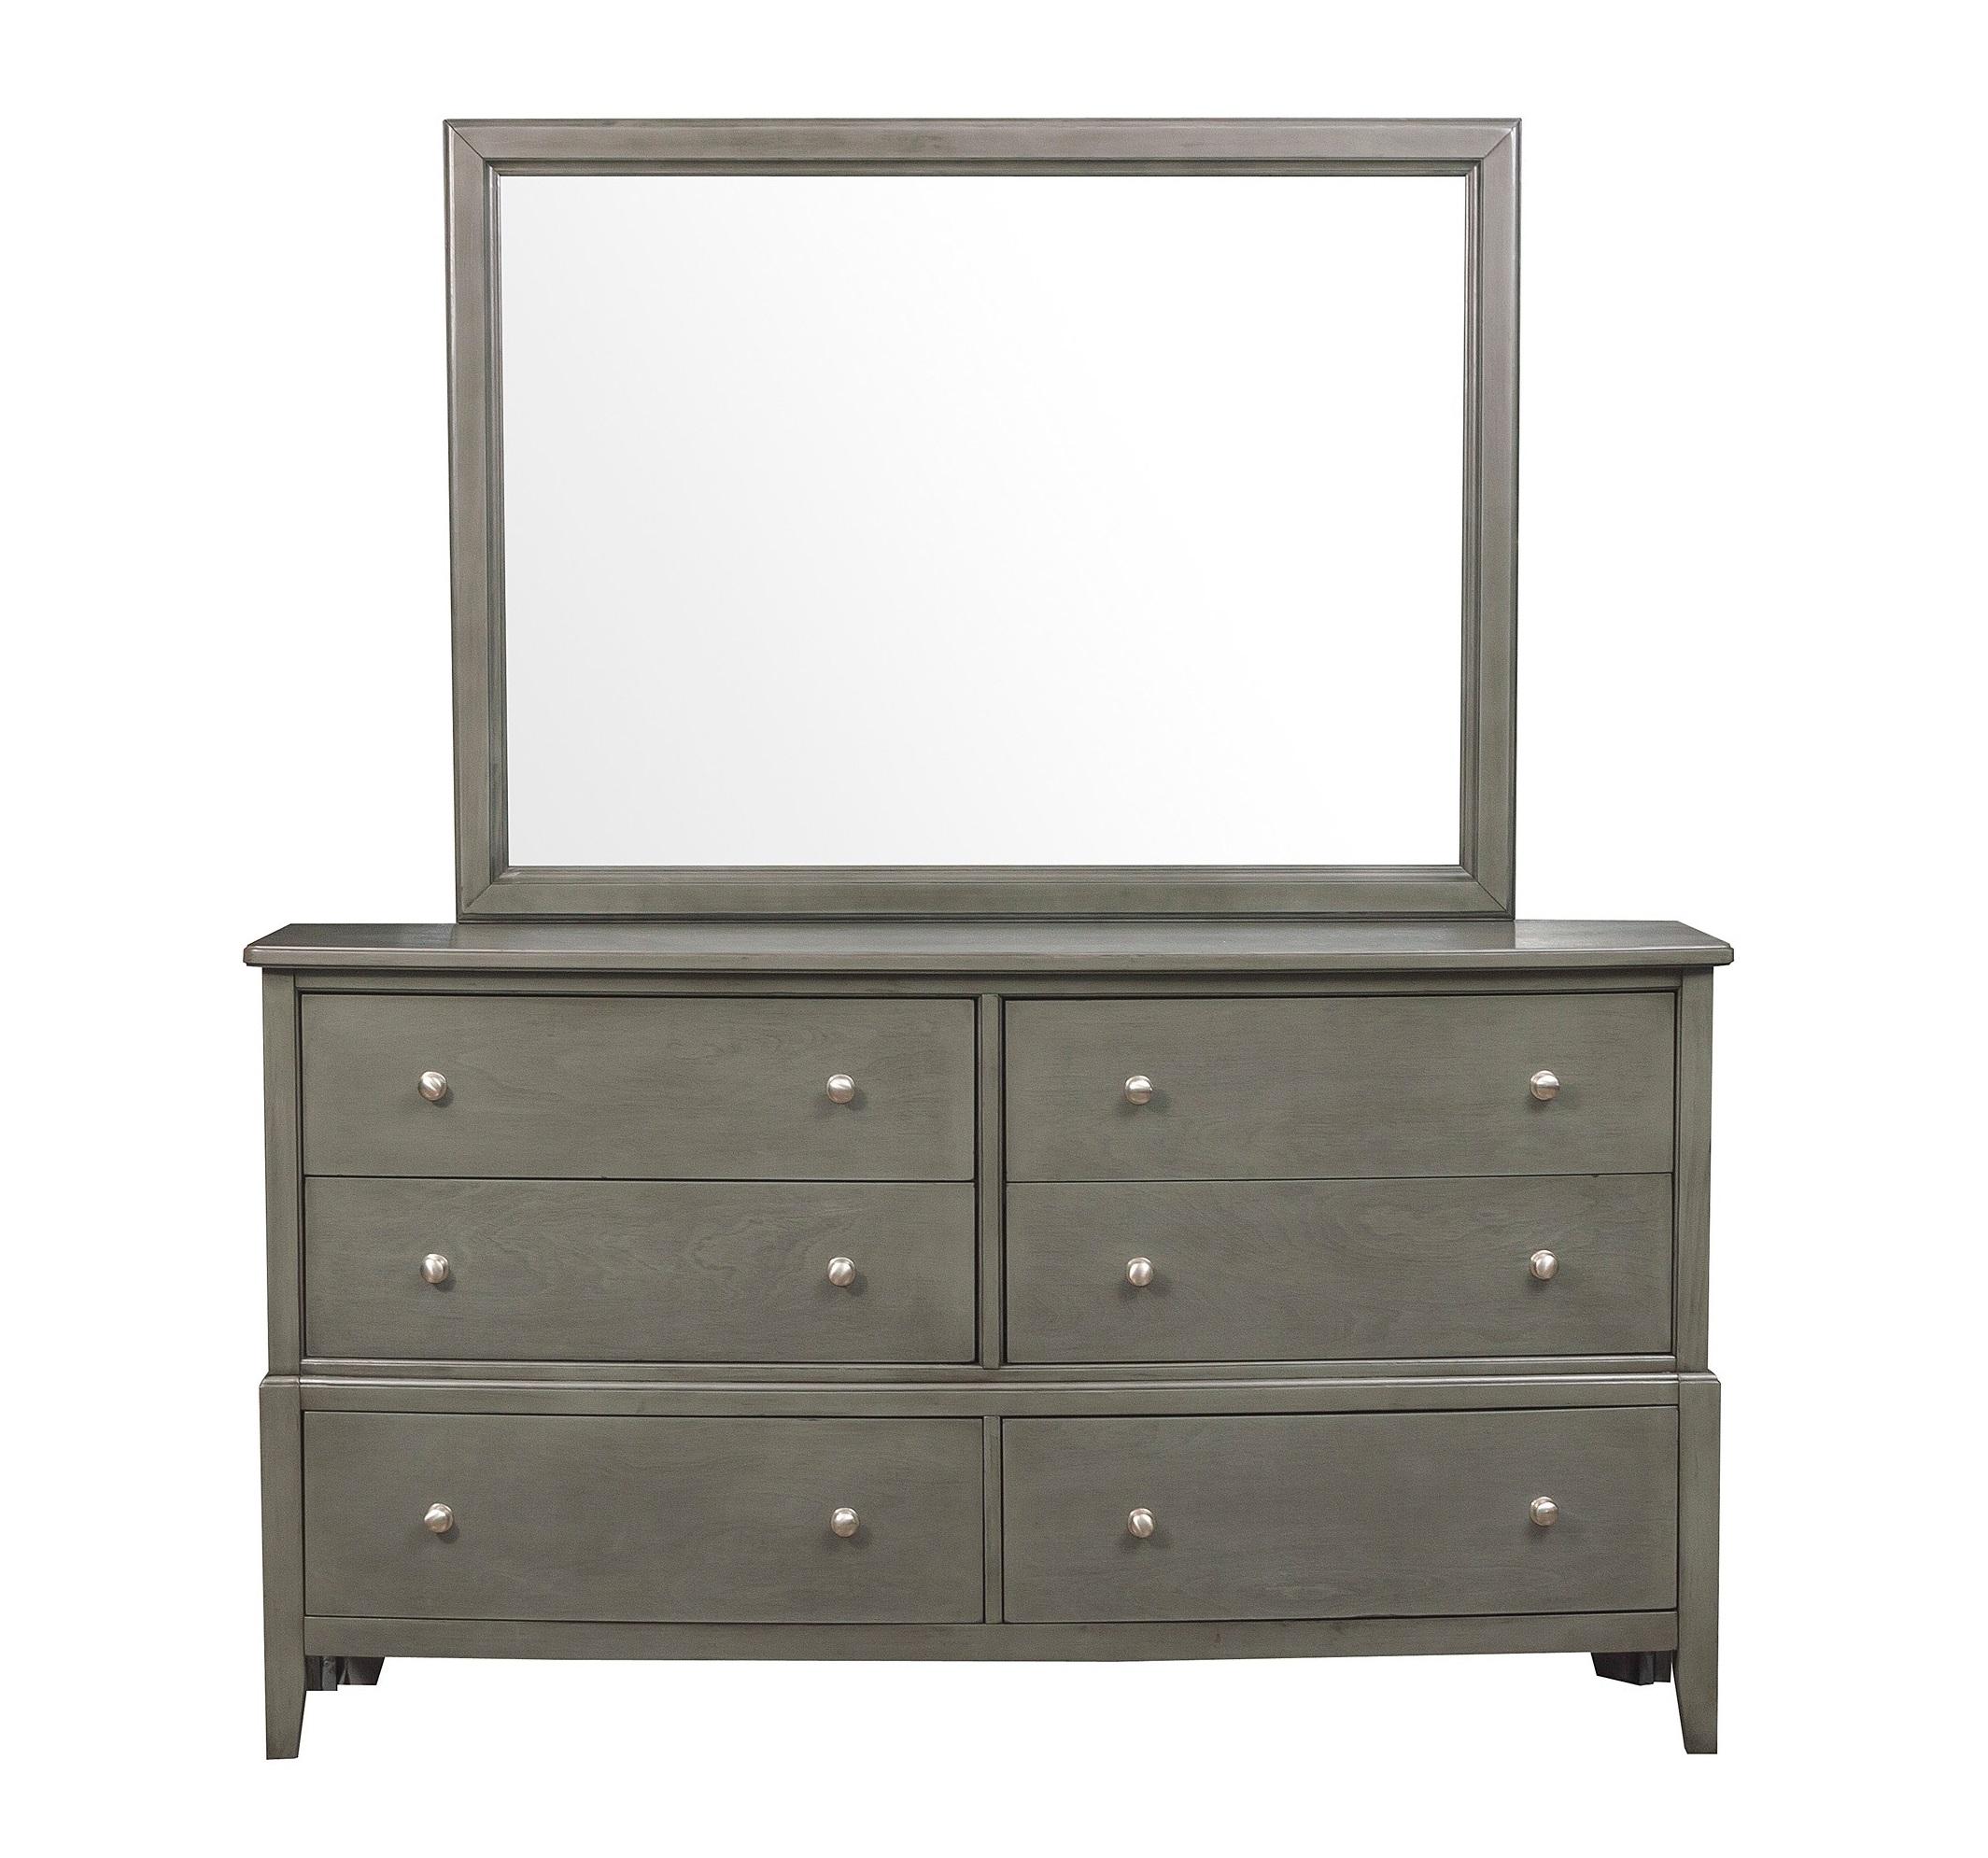 Transitional Dresser w/Mirror 1730GY-5*6-2PC Cotterill 1730GY-5*6-2PC in Gray 